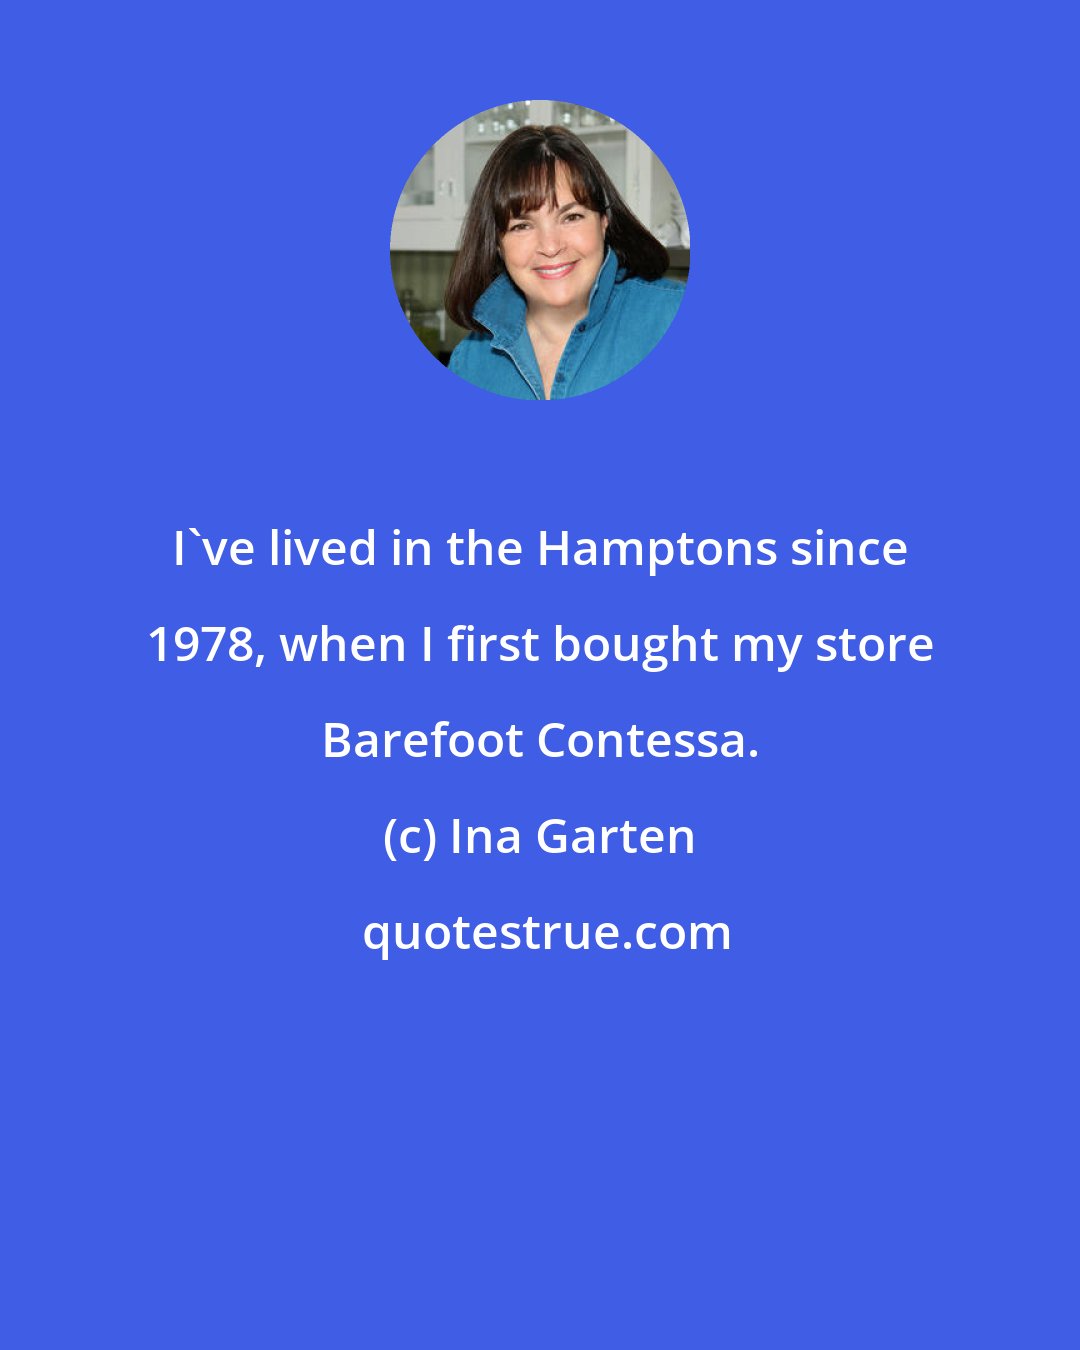 Ina Garten: I've lived in the Hamptons since 1978, when I first bought my store Barefoot Contessa.